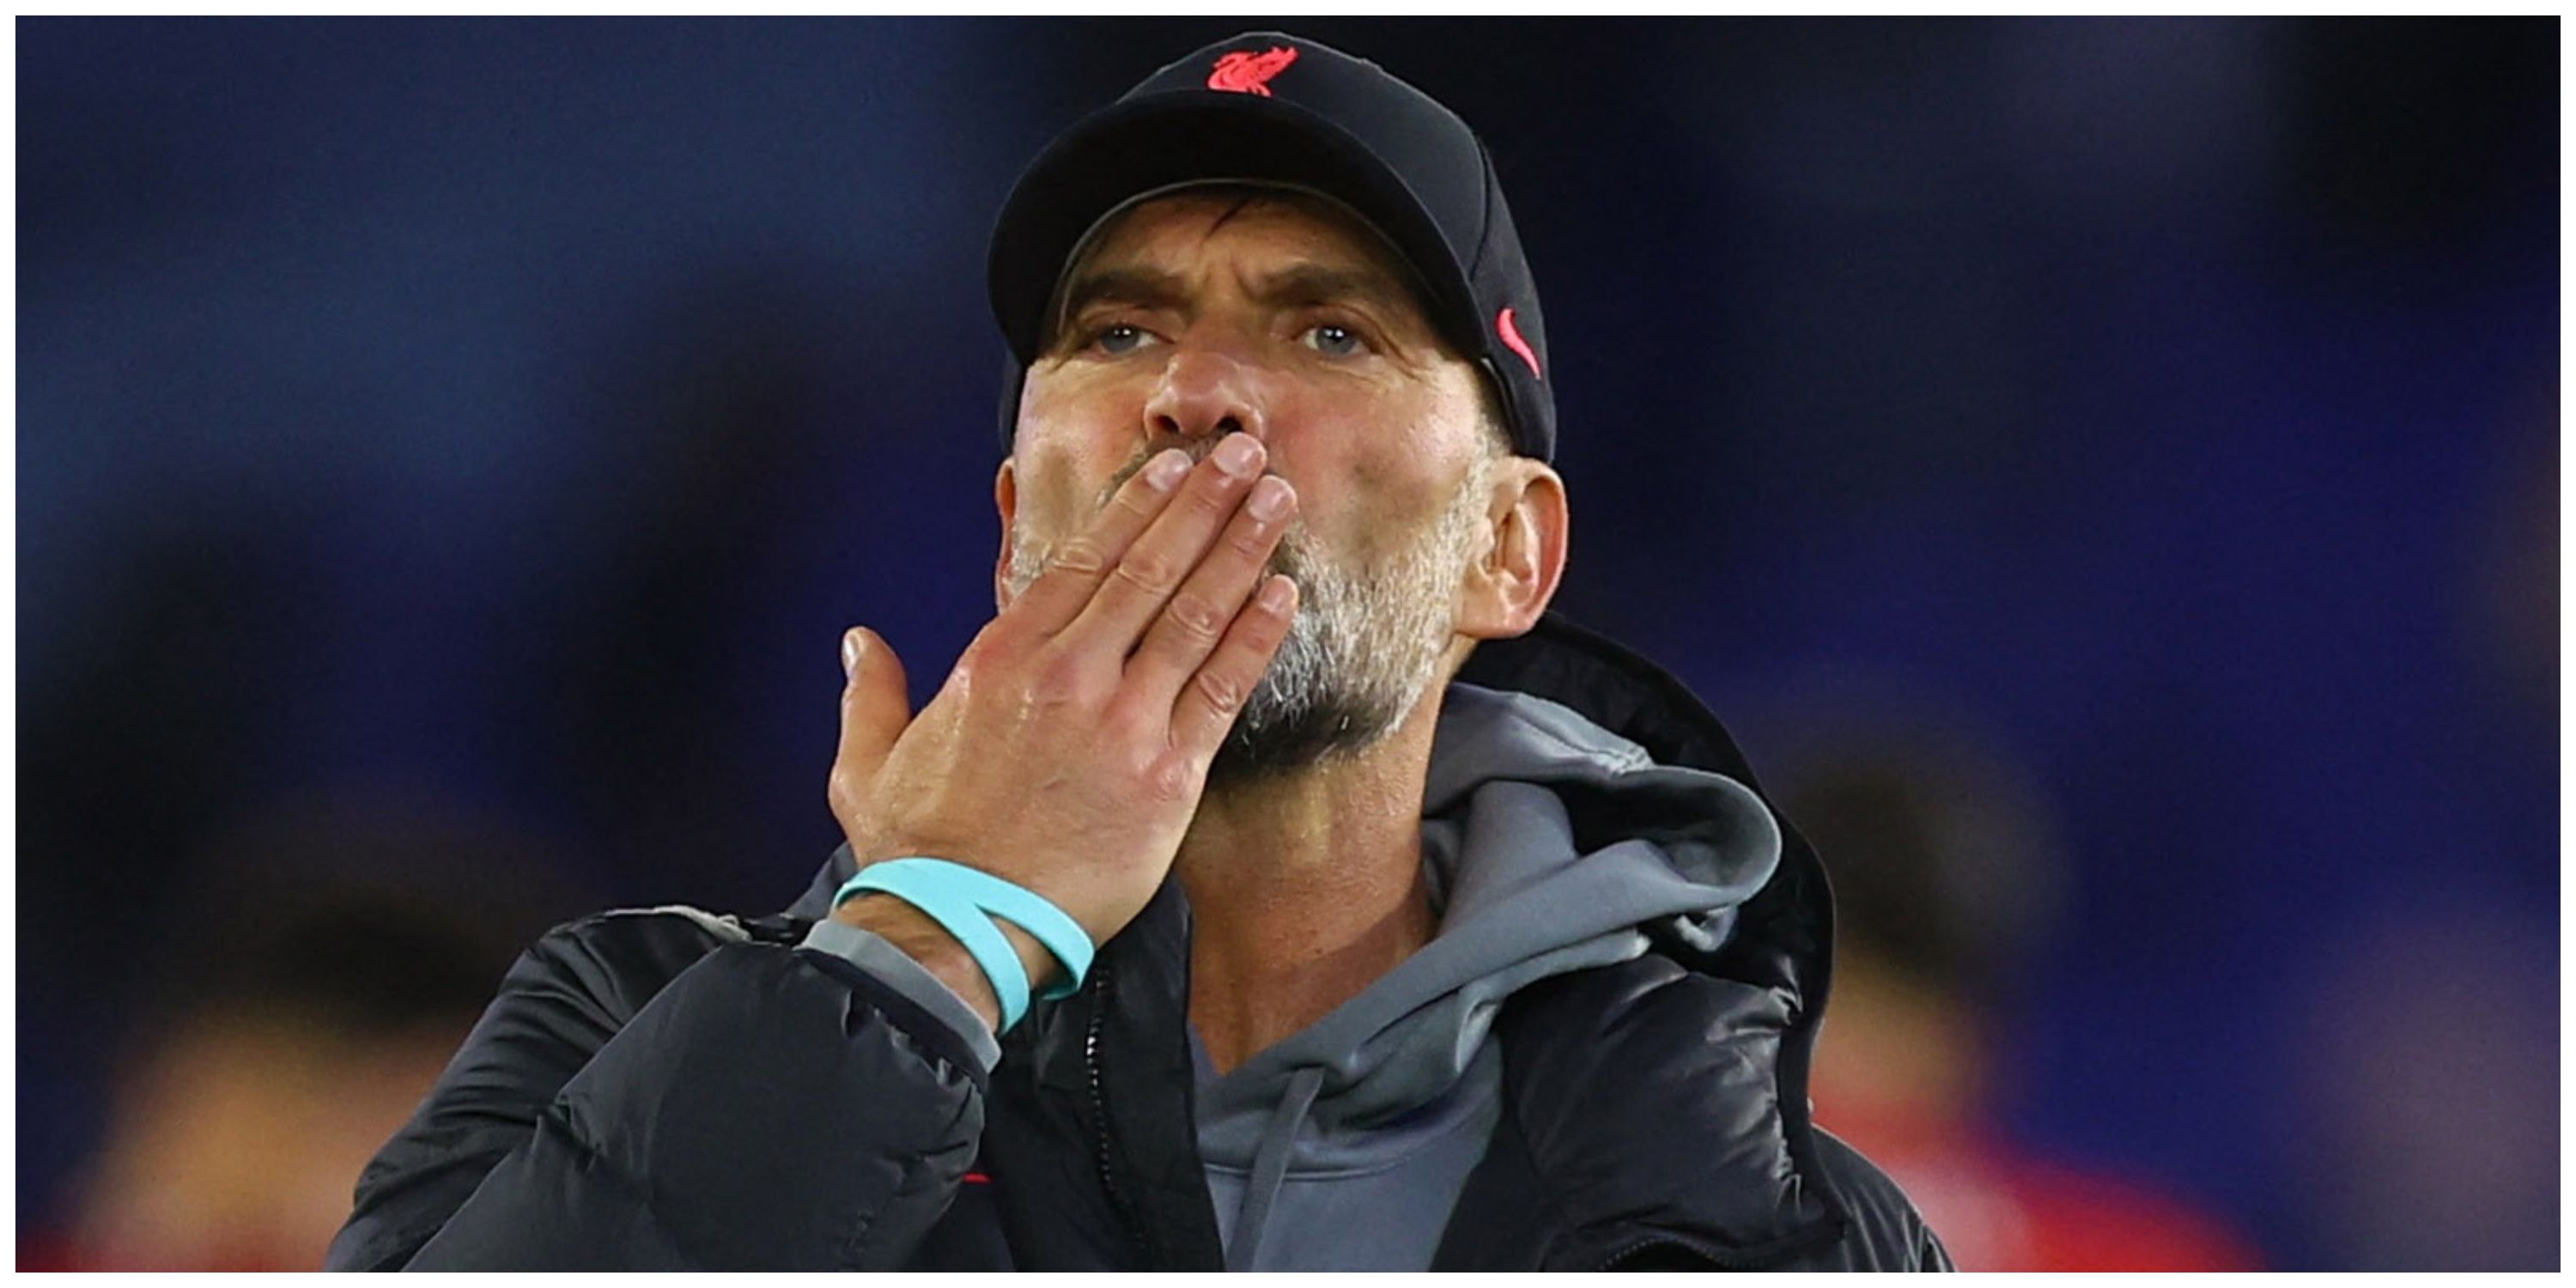 Liverpool manager Jurgen Klopp blowing kiss to supporters